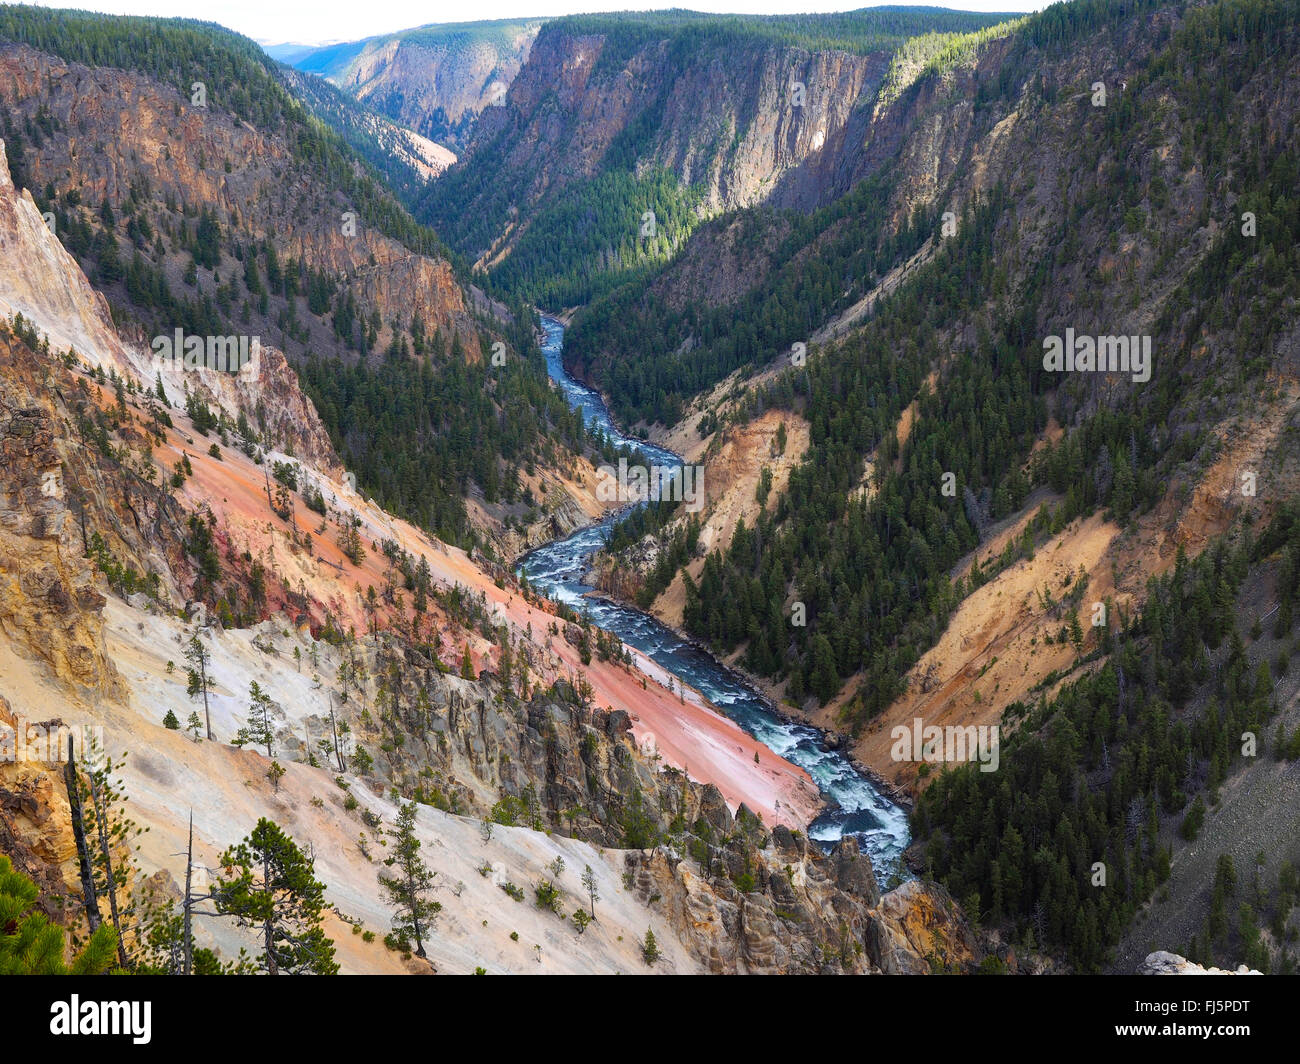 Grand Canon de Yellowstone, USA, Wyoming, Yellowstone National Park Banque D'Images